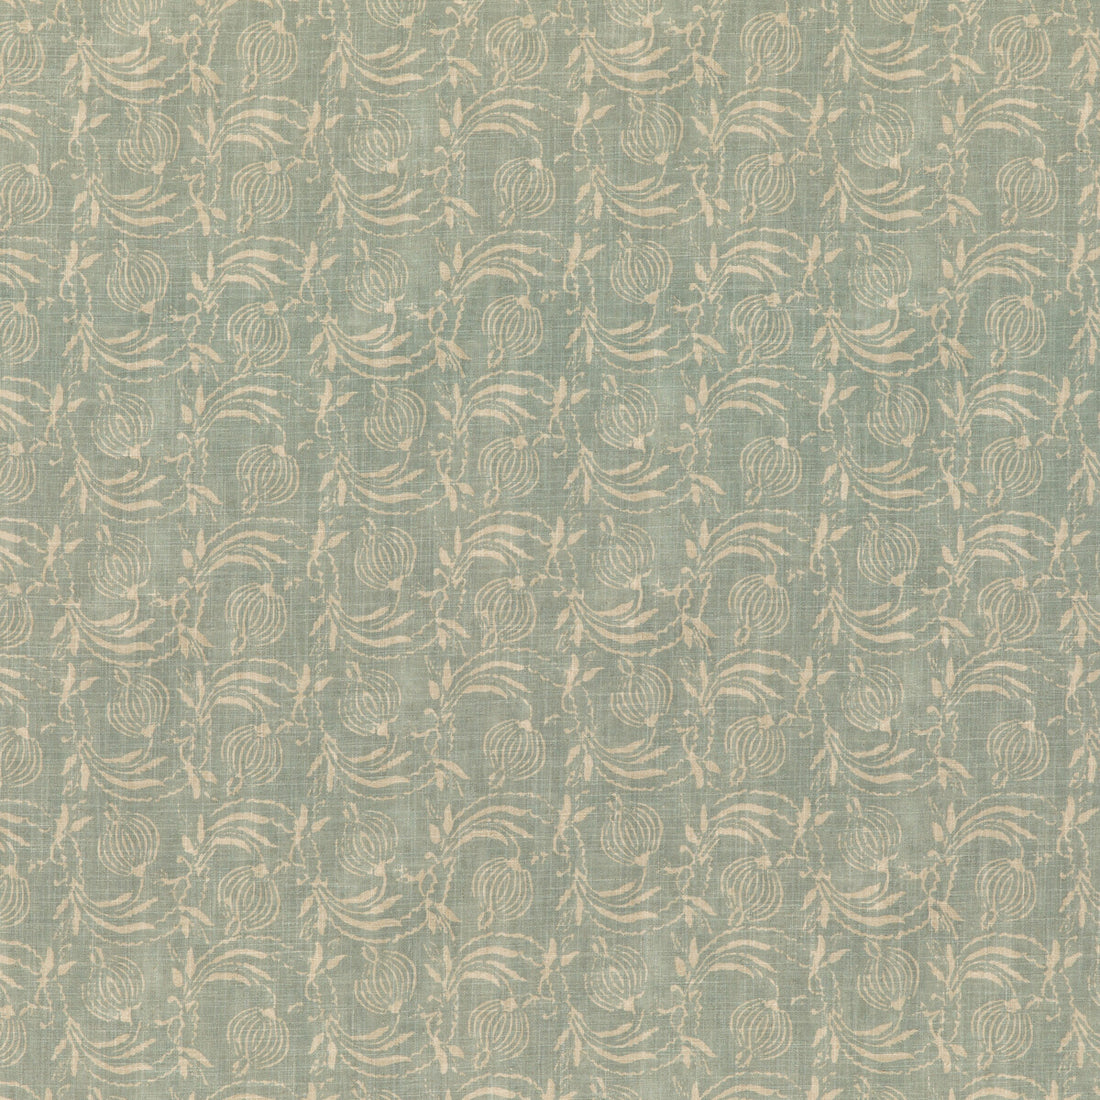 Pomegranate fabric in aqua color - pattern BP10825.4.0 - by G P &amp; J Baker in the Coromandel Small Prints collection